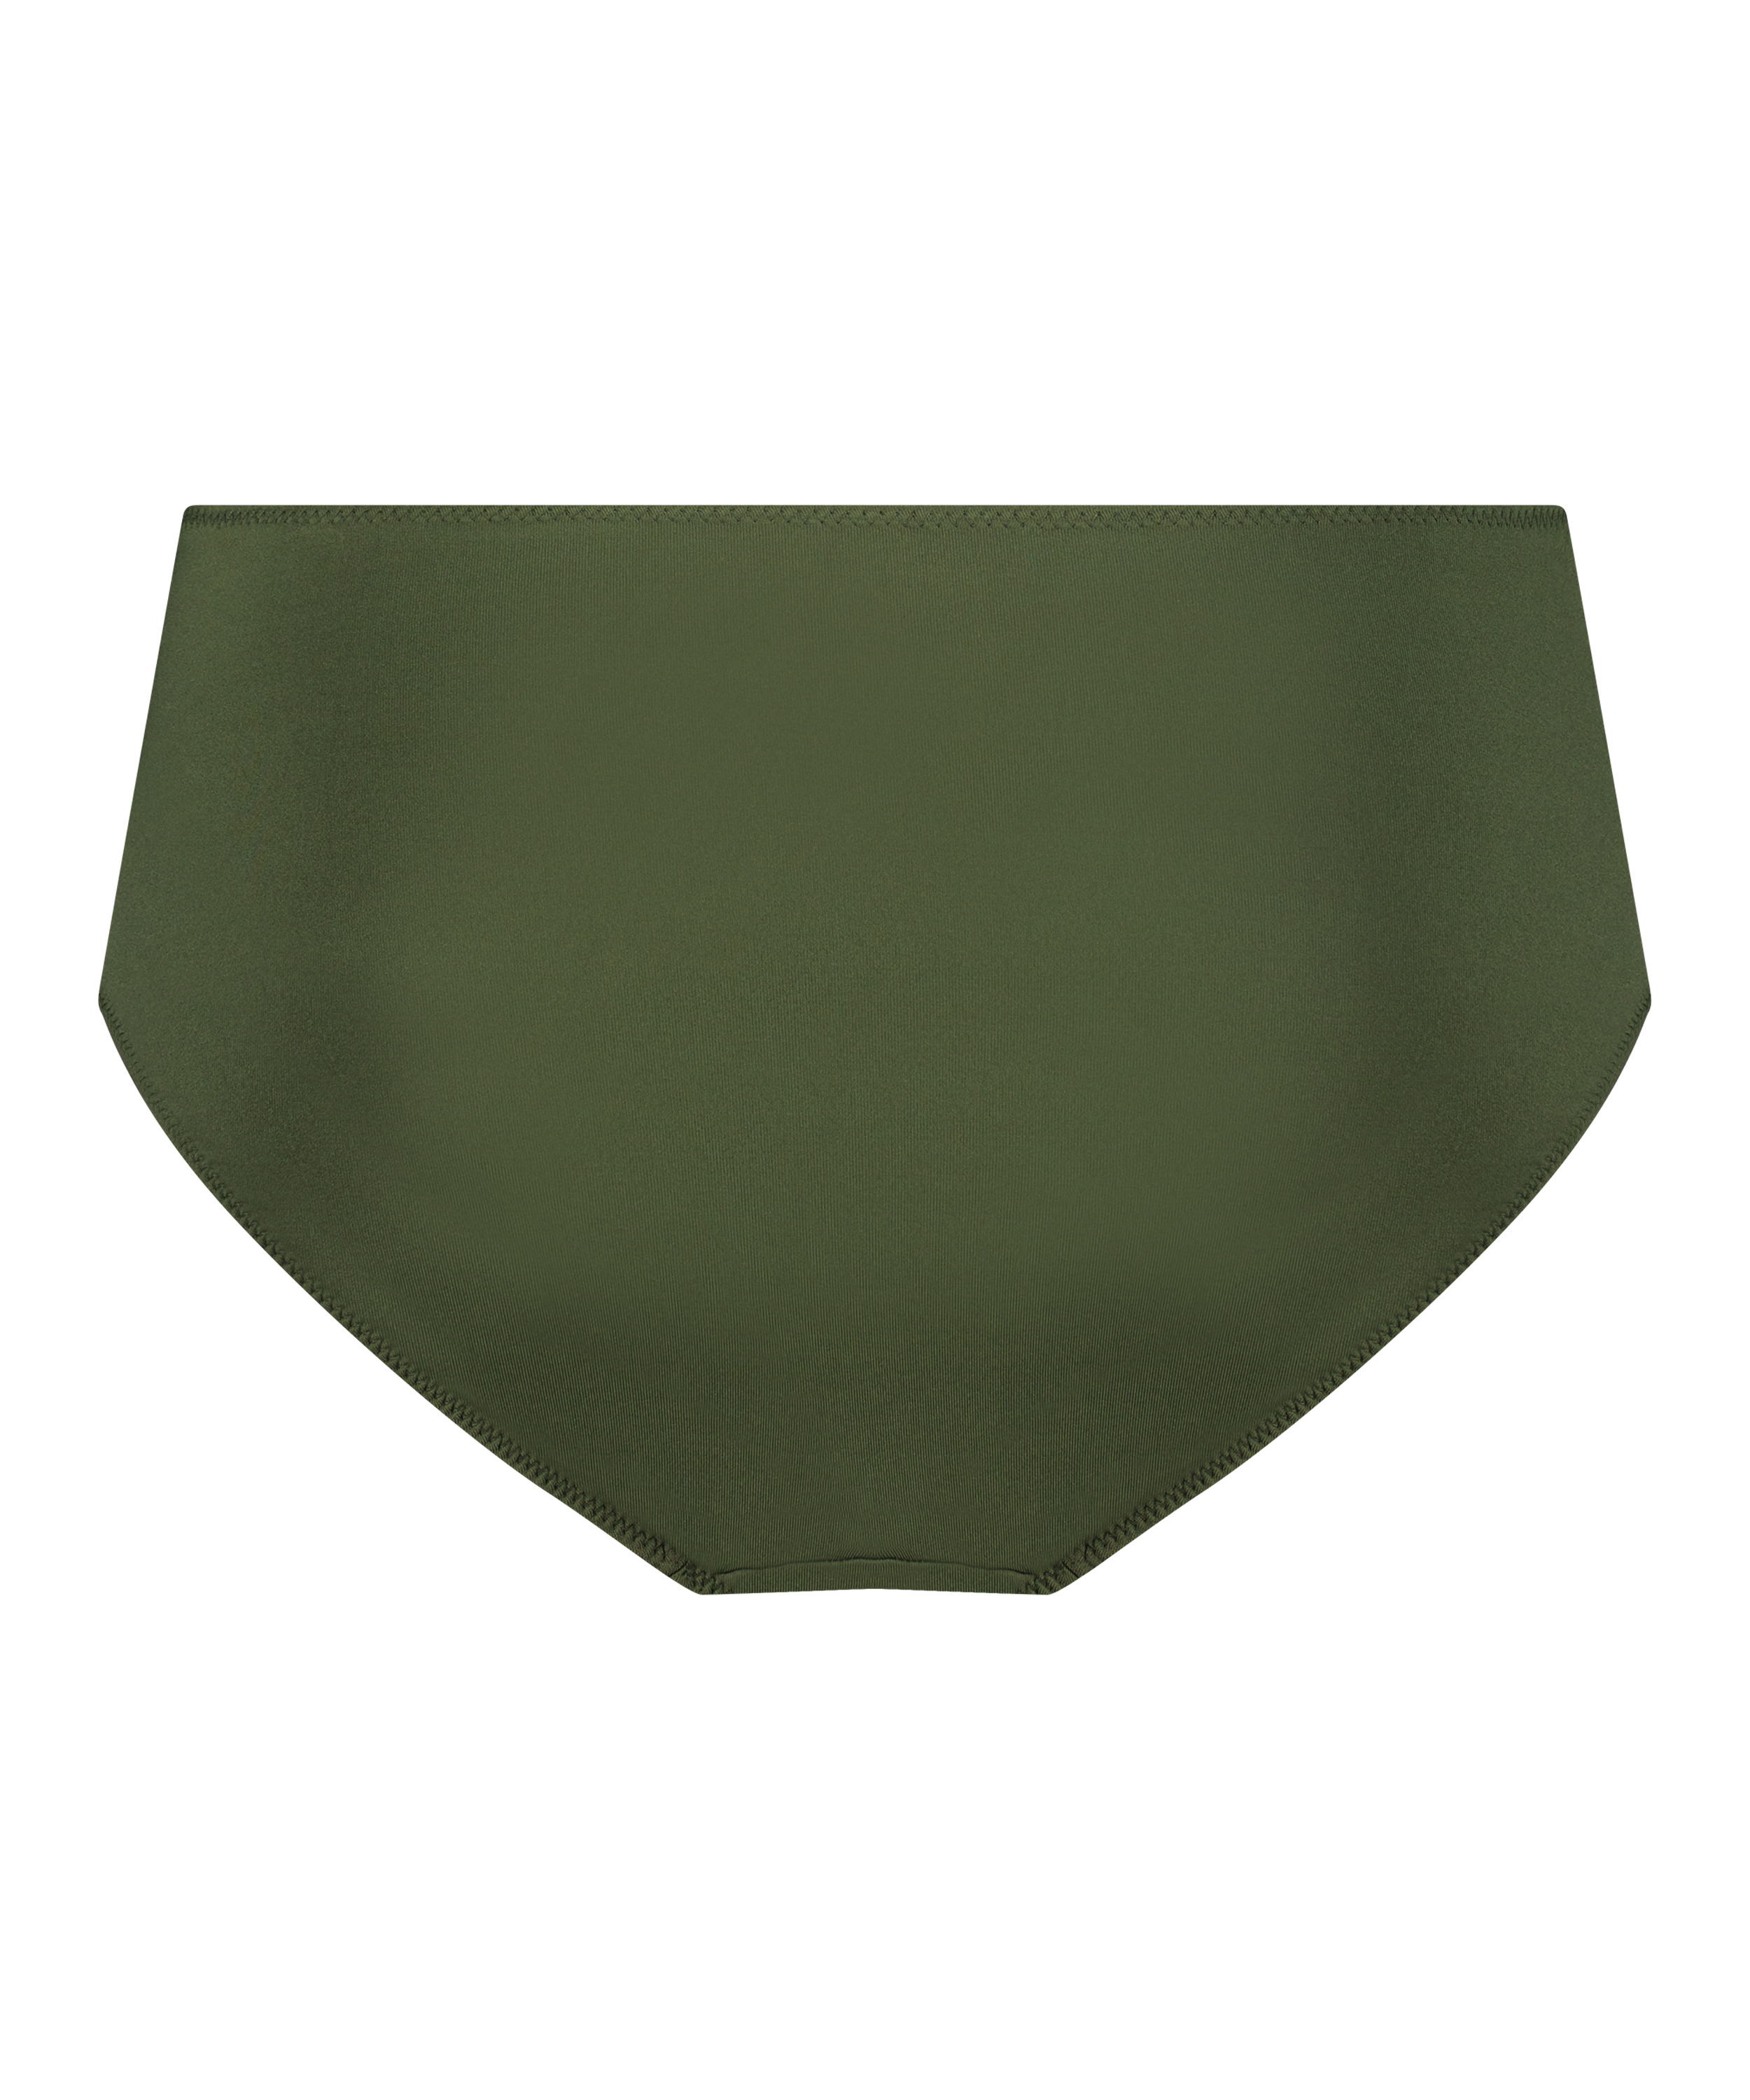 Sophie high knickers, Green, main